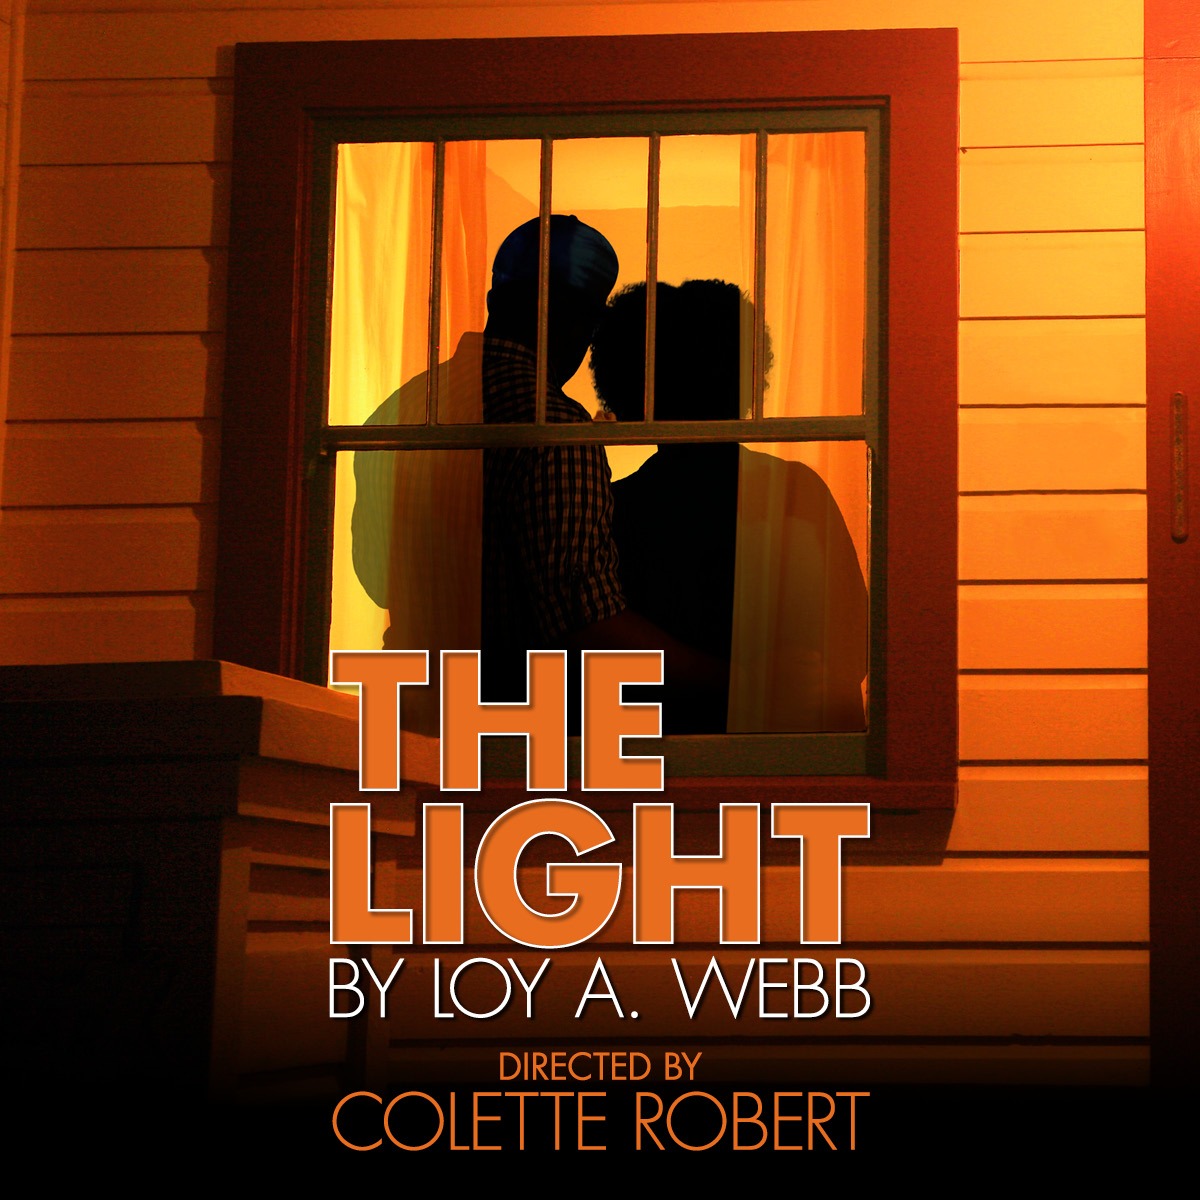 Marketing graphic for THE LIGHT in shades of orange, yellow, and brown. A Black couple is silhouetted in a window.